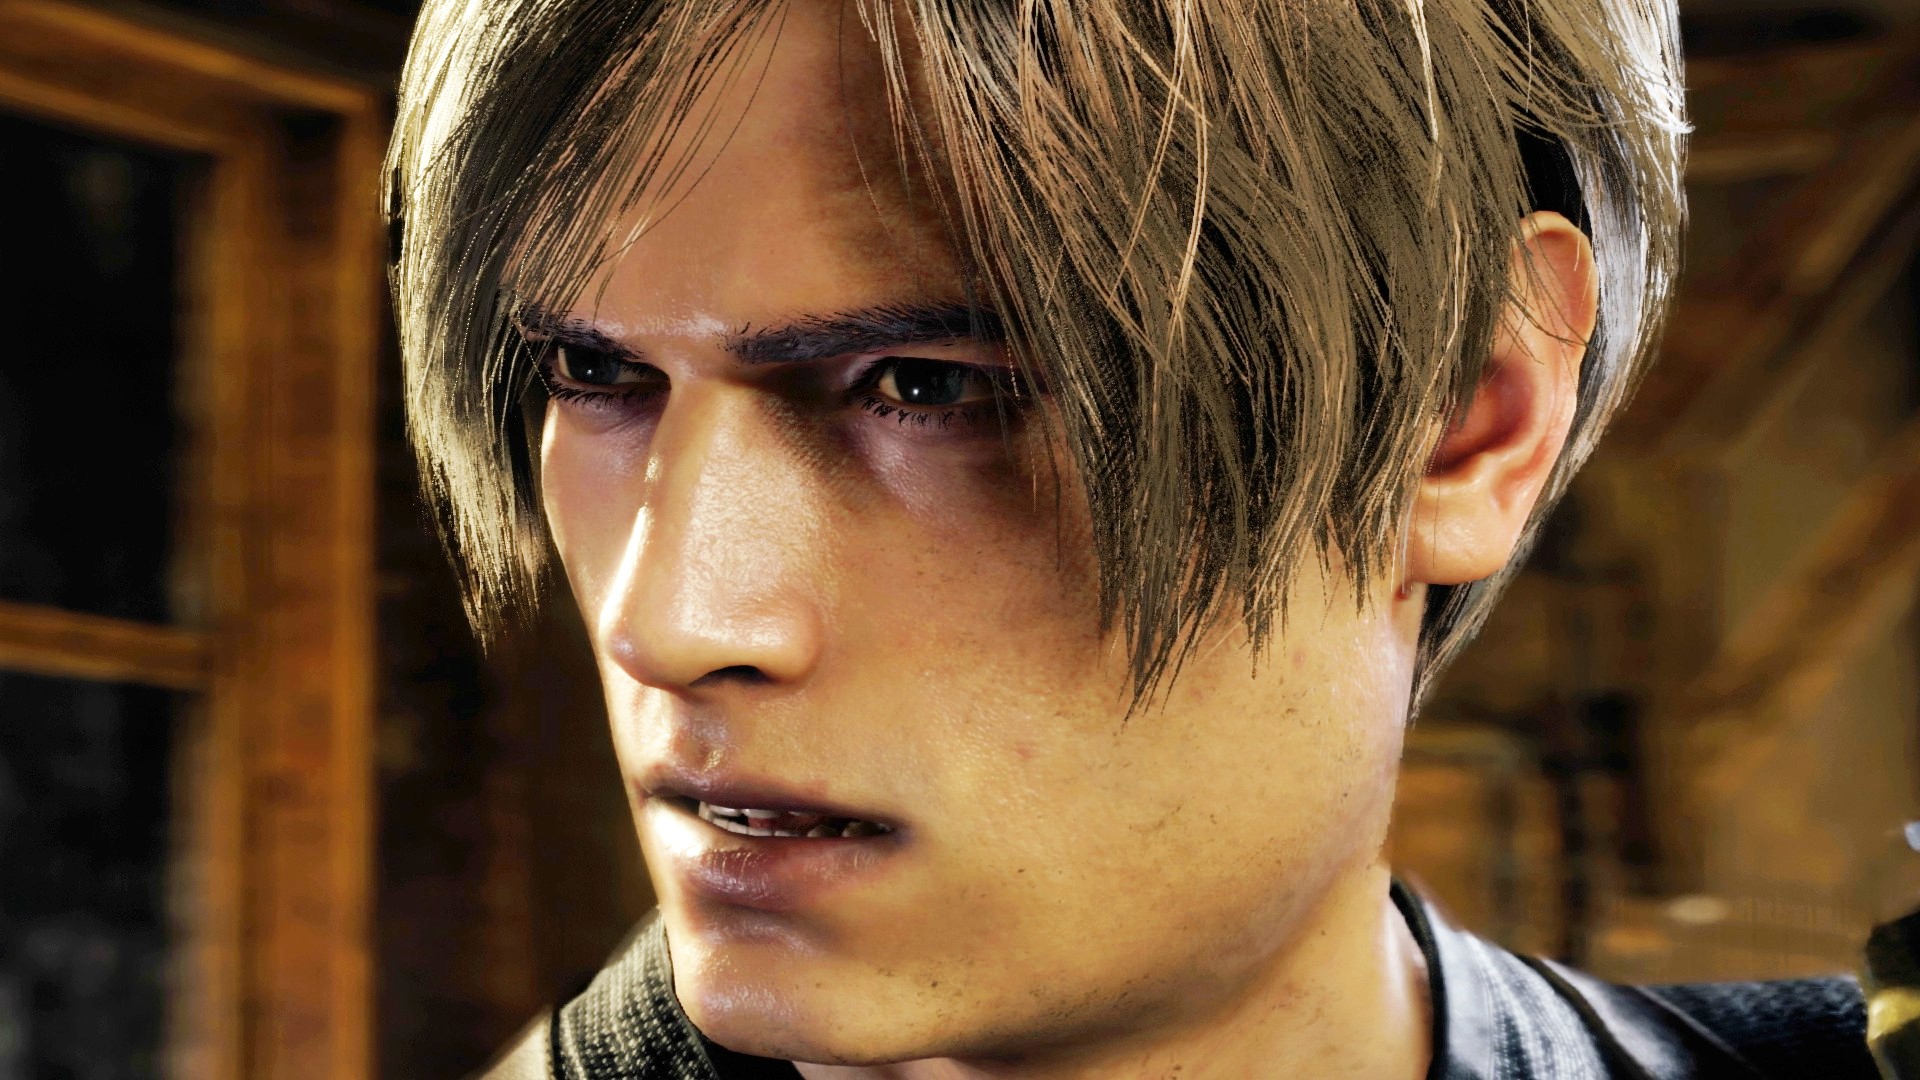 Resident Evil 4 Remake Is Discounted For PC - GameSpot